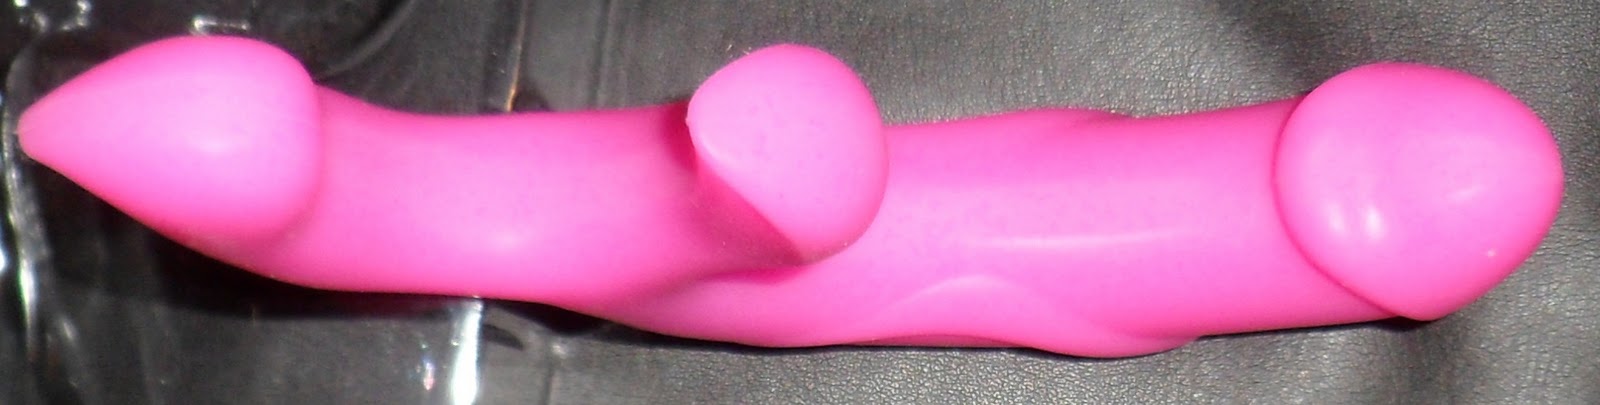 Amuse G Amorous Sex Toy Reviews And Advice From